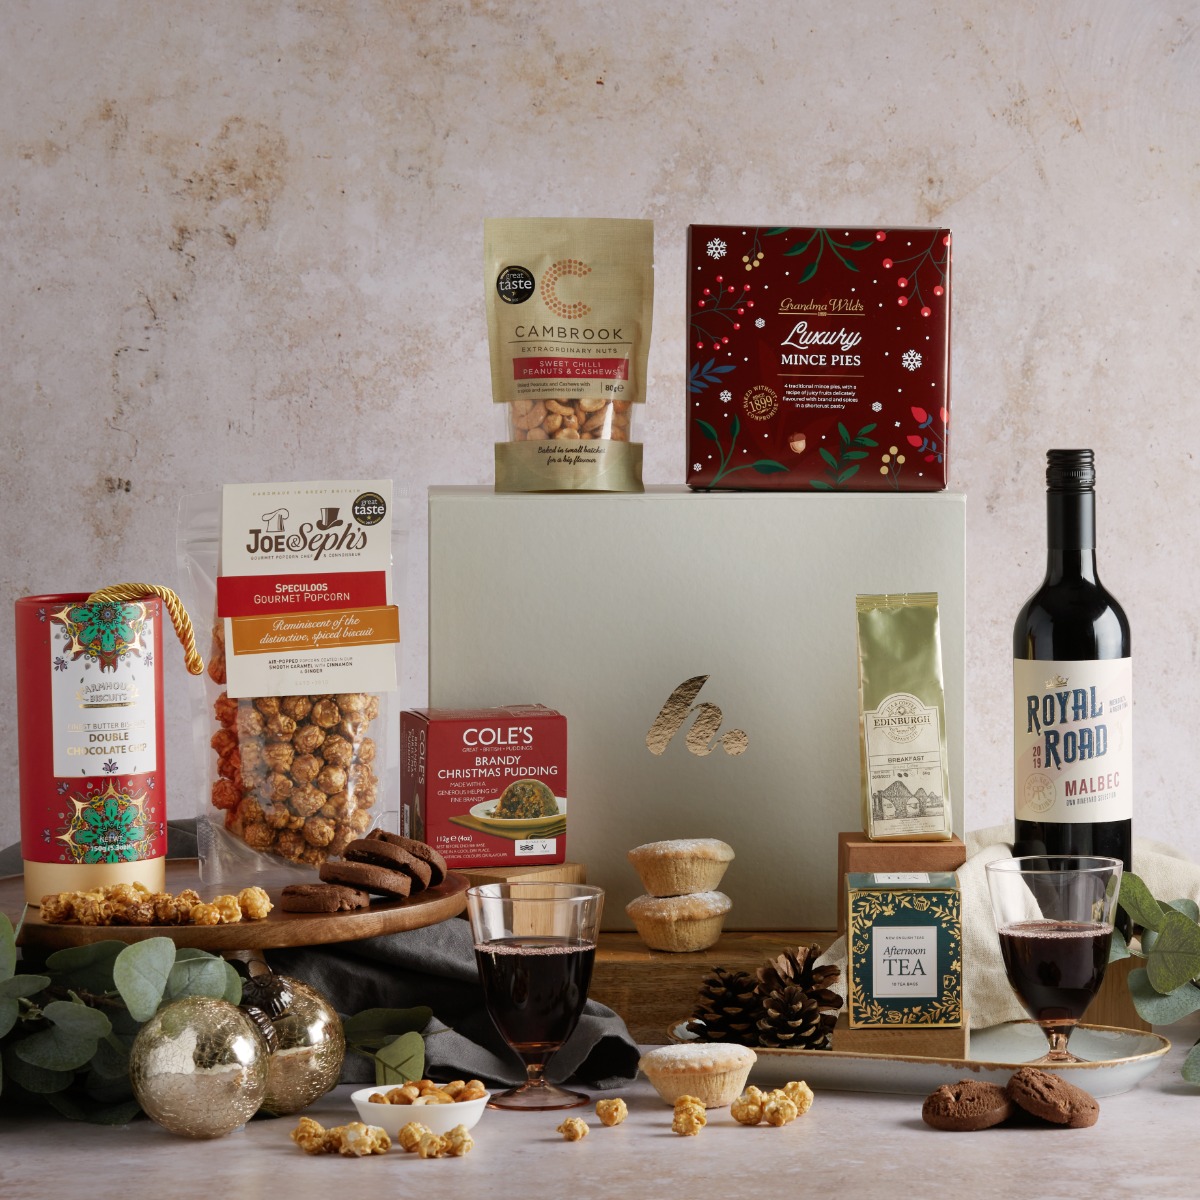 The Christmas Cracker Hamper with contents on display